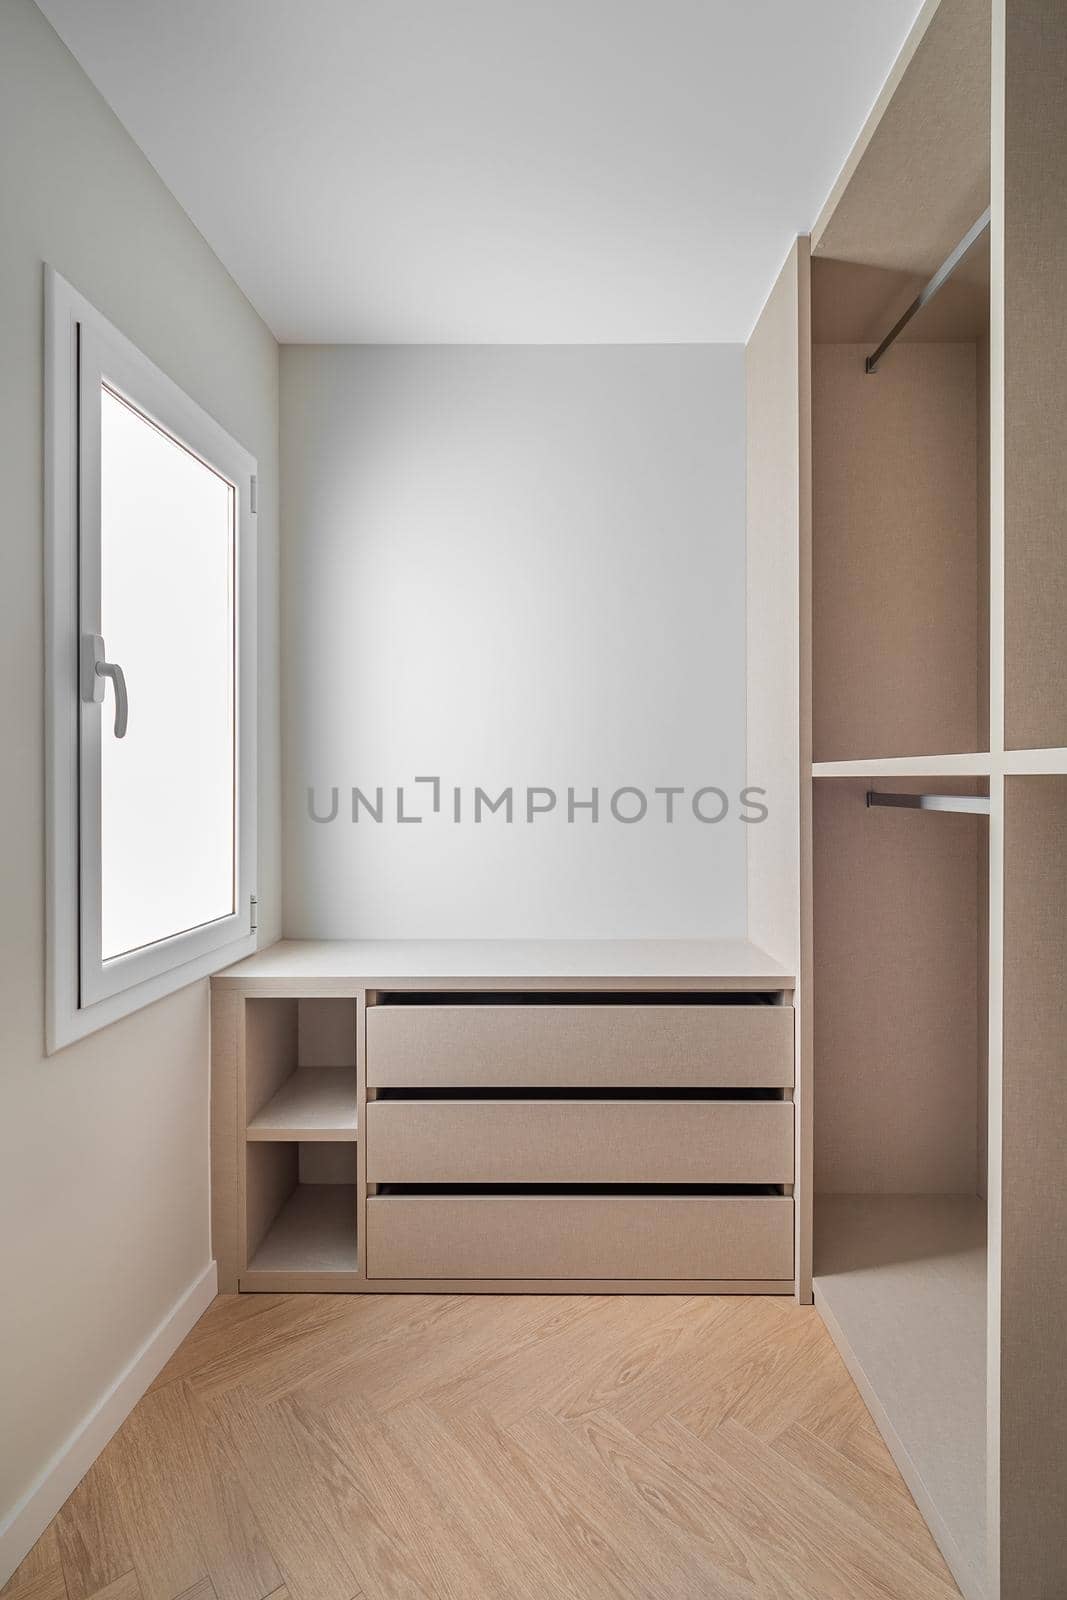 New built-in furniture in a small dressing room. Modern and empty storage room with wardrobe, drawers and plenty of space for hangers